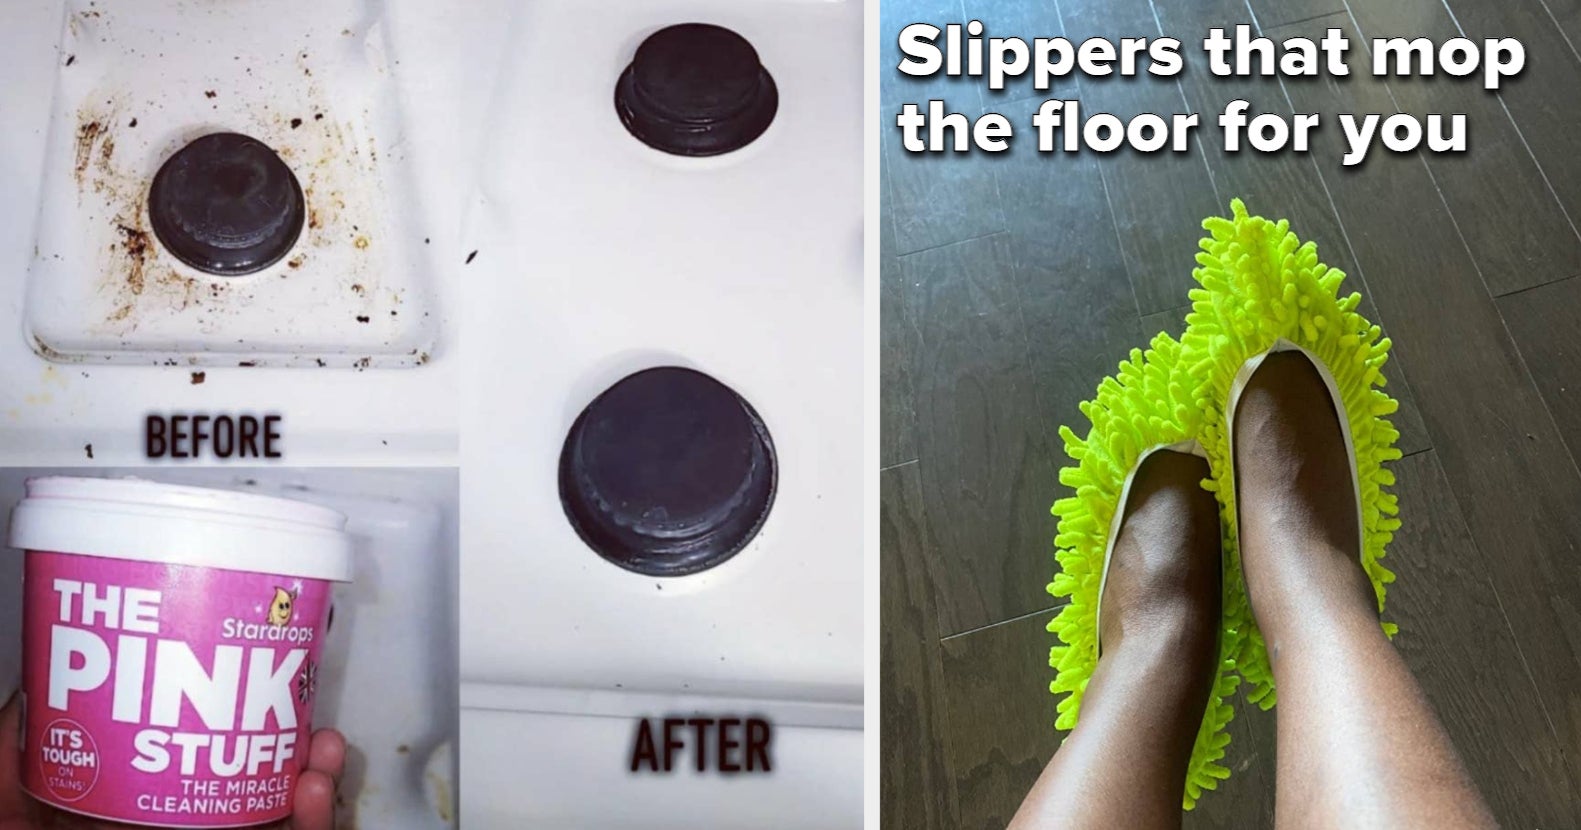 35 Cleaning Products That Seem Too Good To Be True